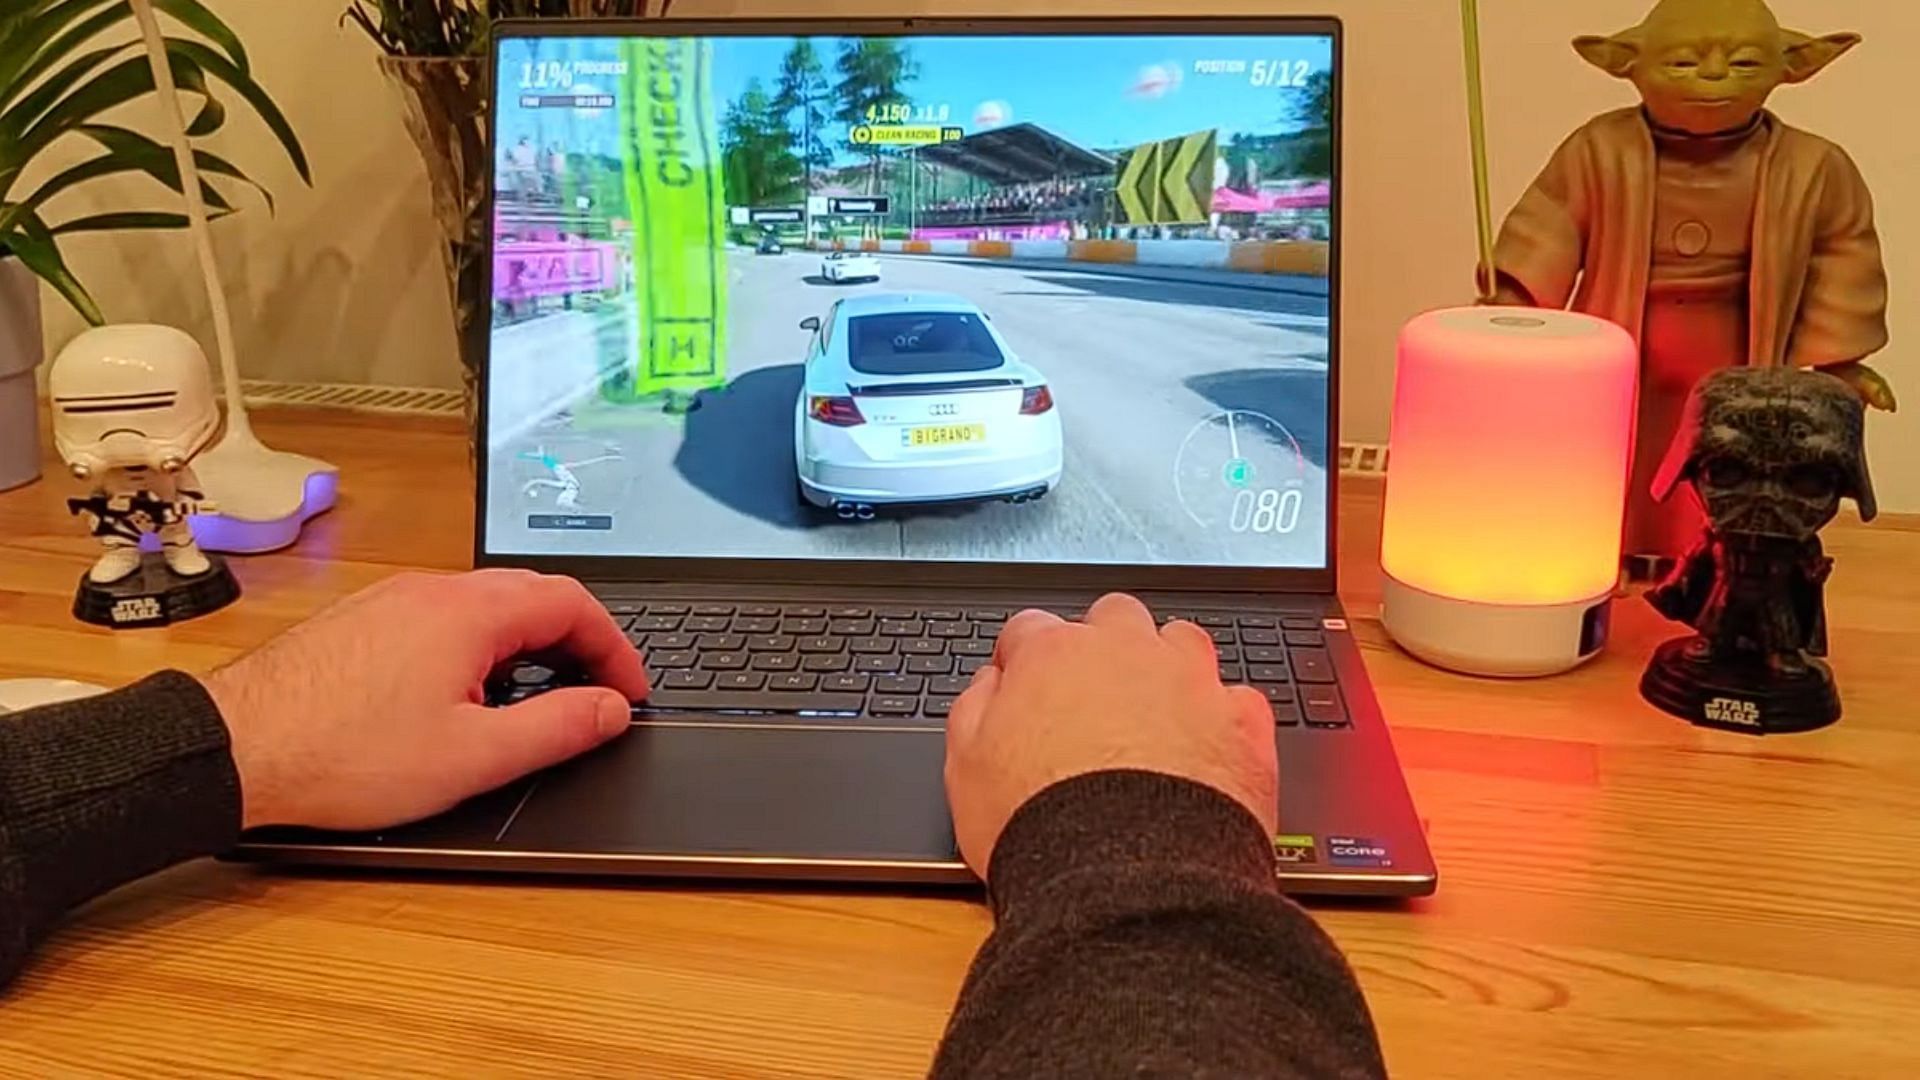 Dell Inspiron laptops are capable of gaming (Image via YouTube/@The Big Rano)